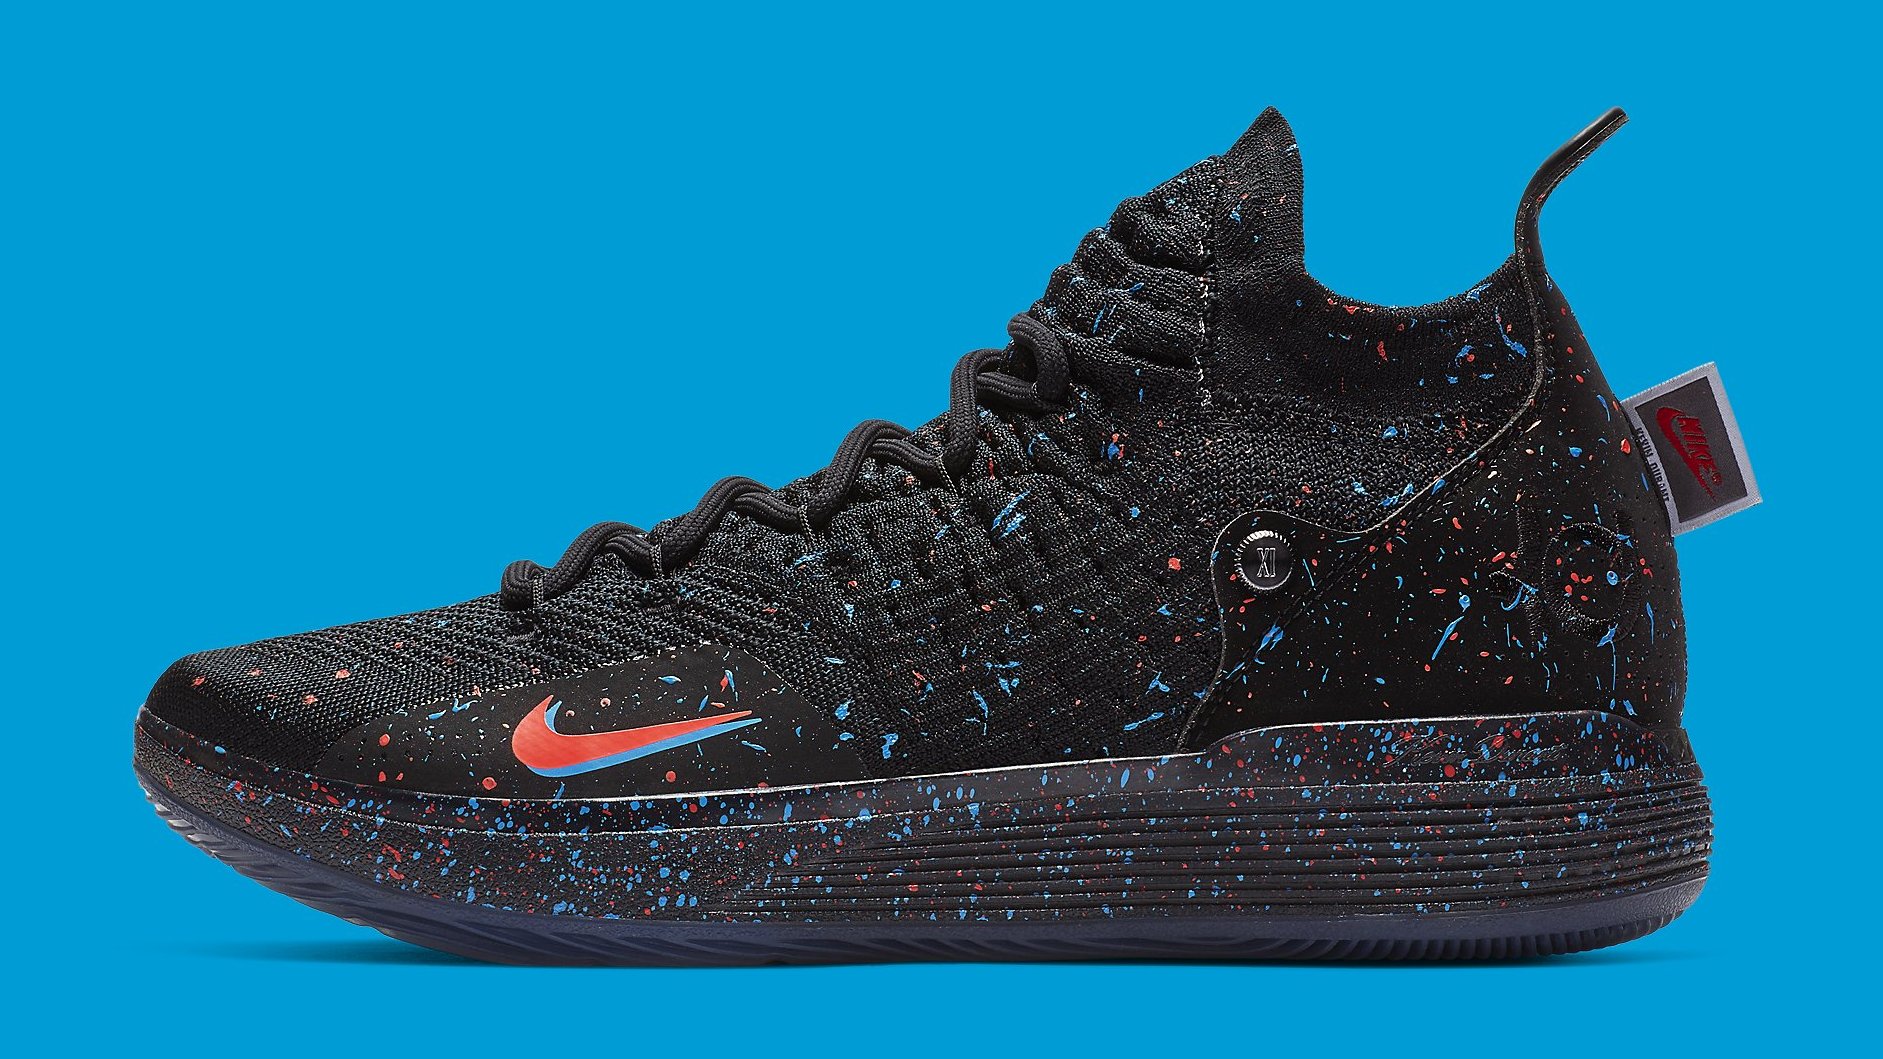 Nike KD 11 &#x27;Just Do It&#x27; AO2604 007 Lateral